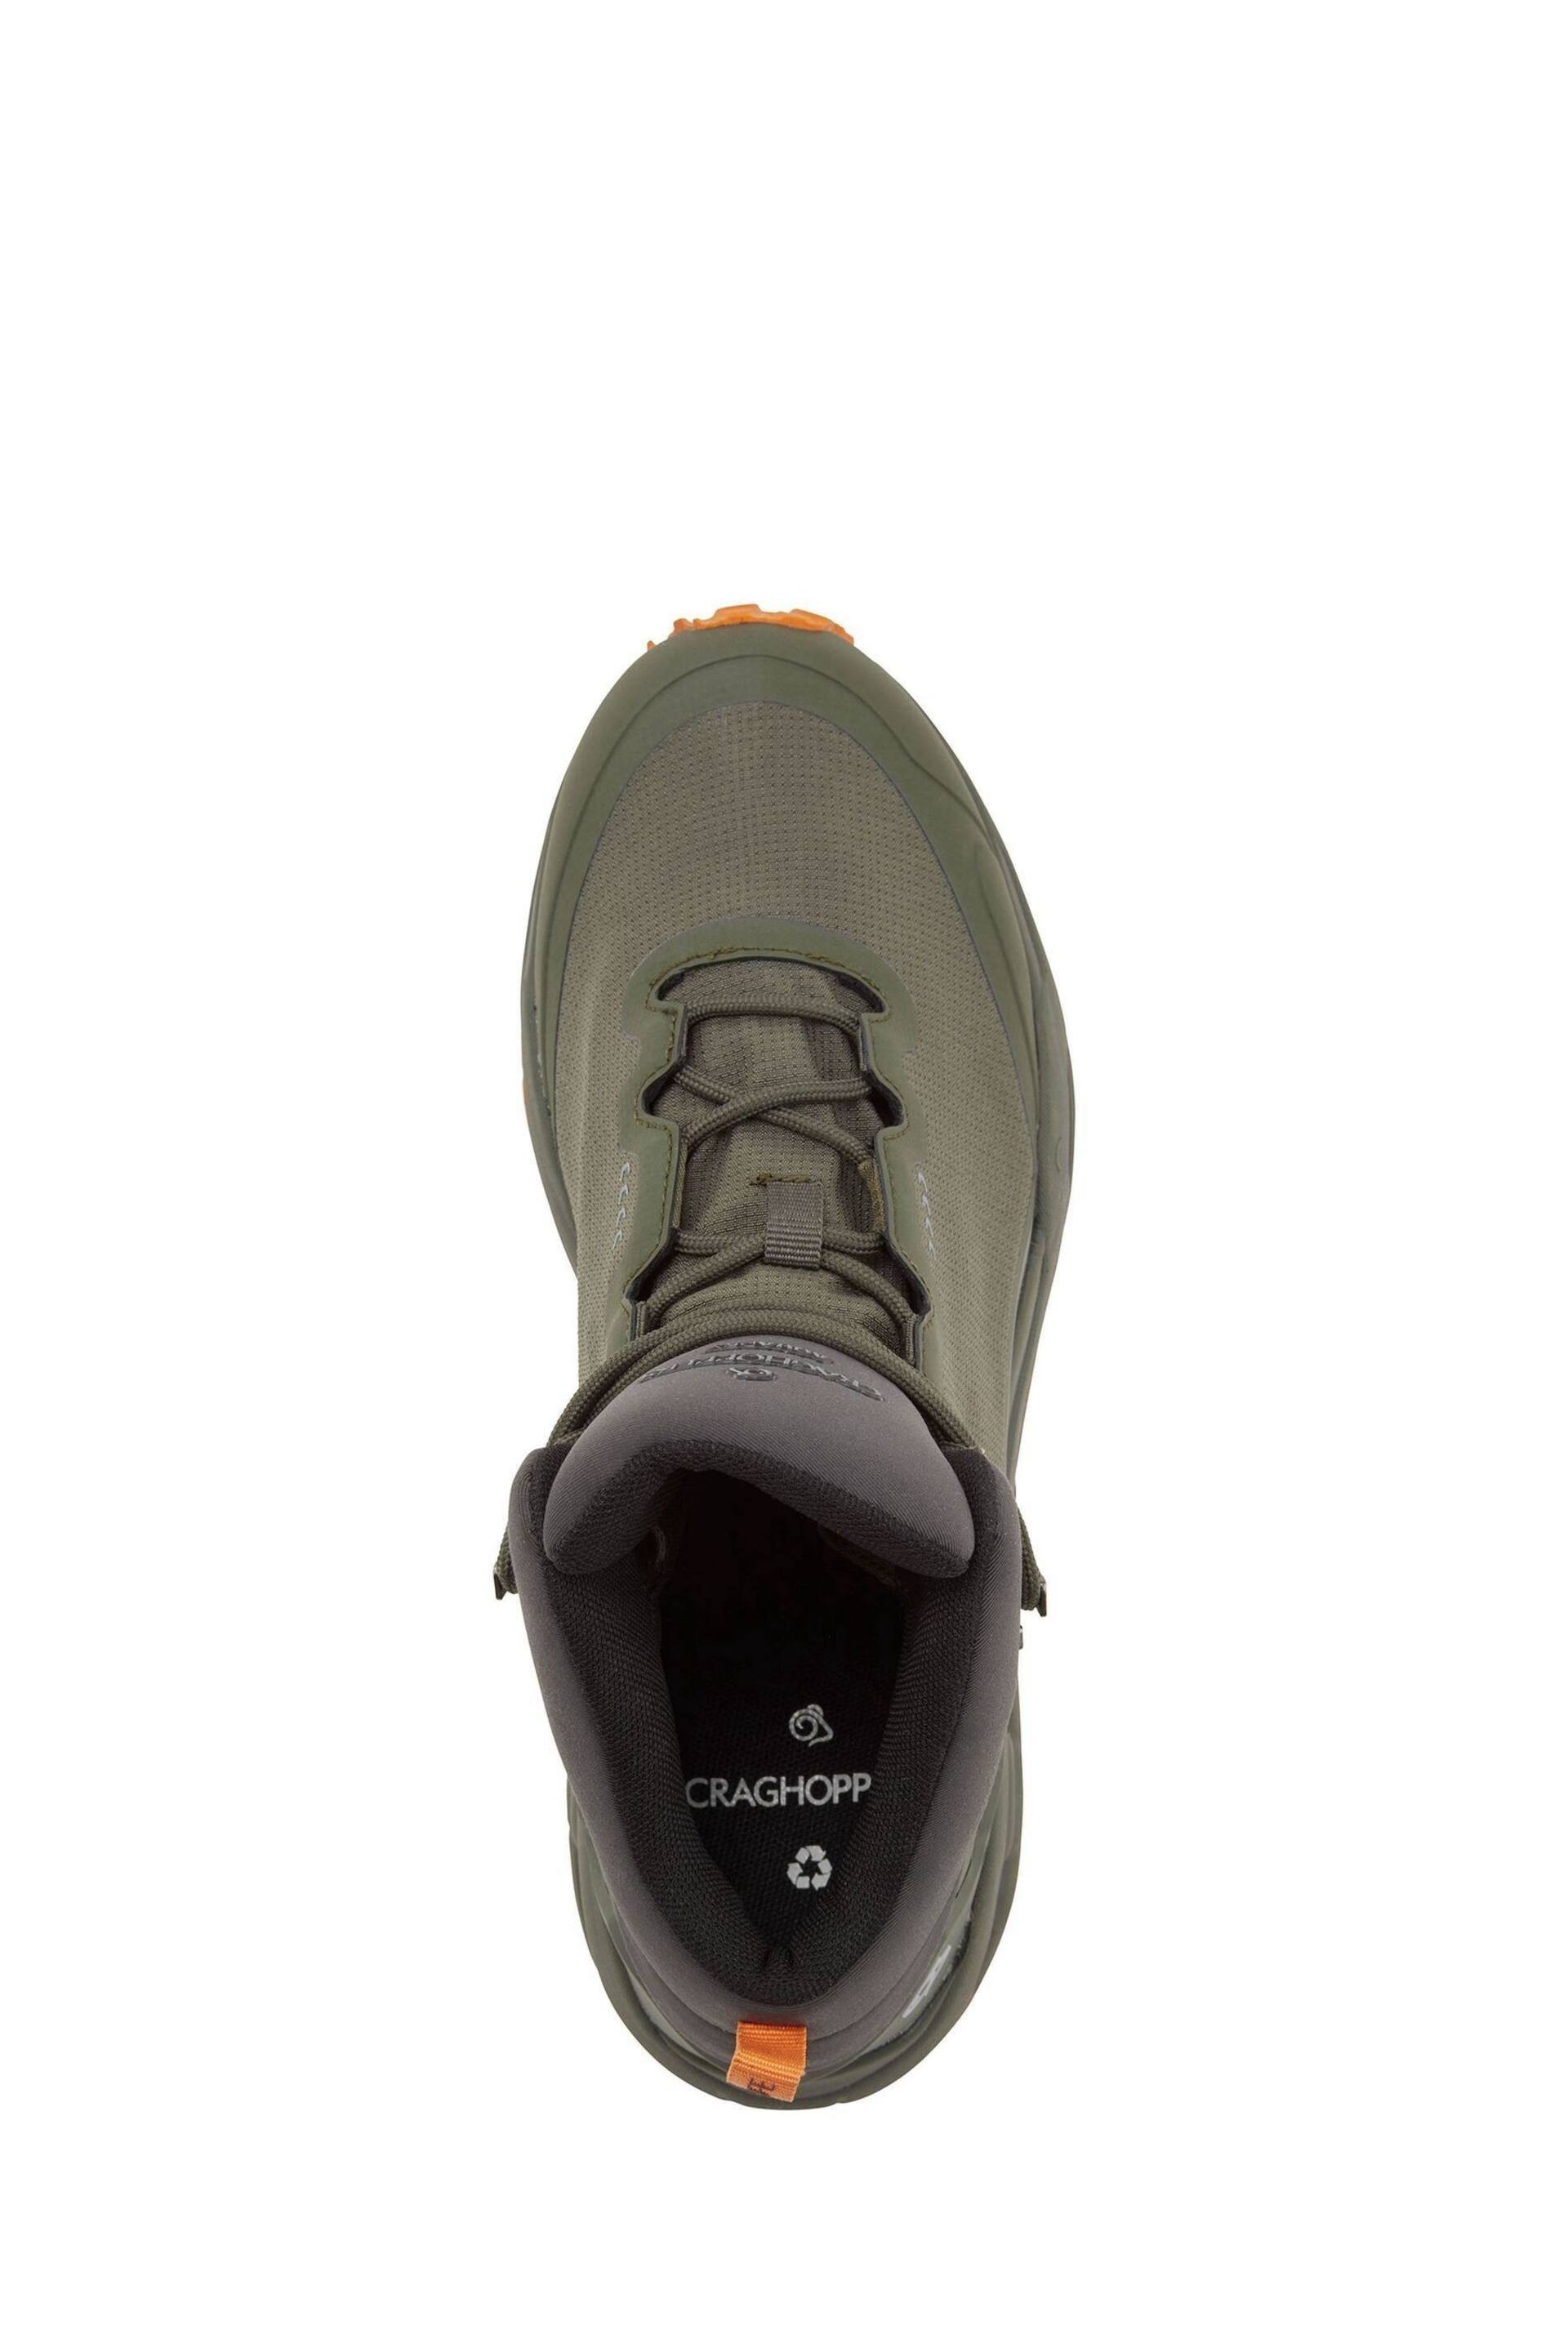 Craghoppers Grey Adflex Shoes - Image 3 of 4